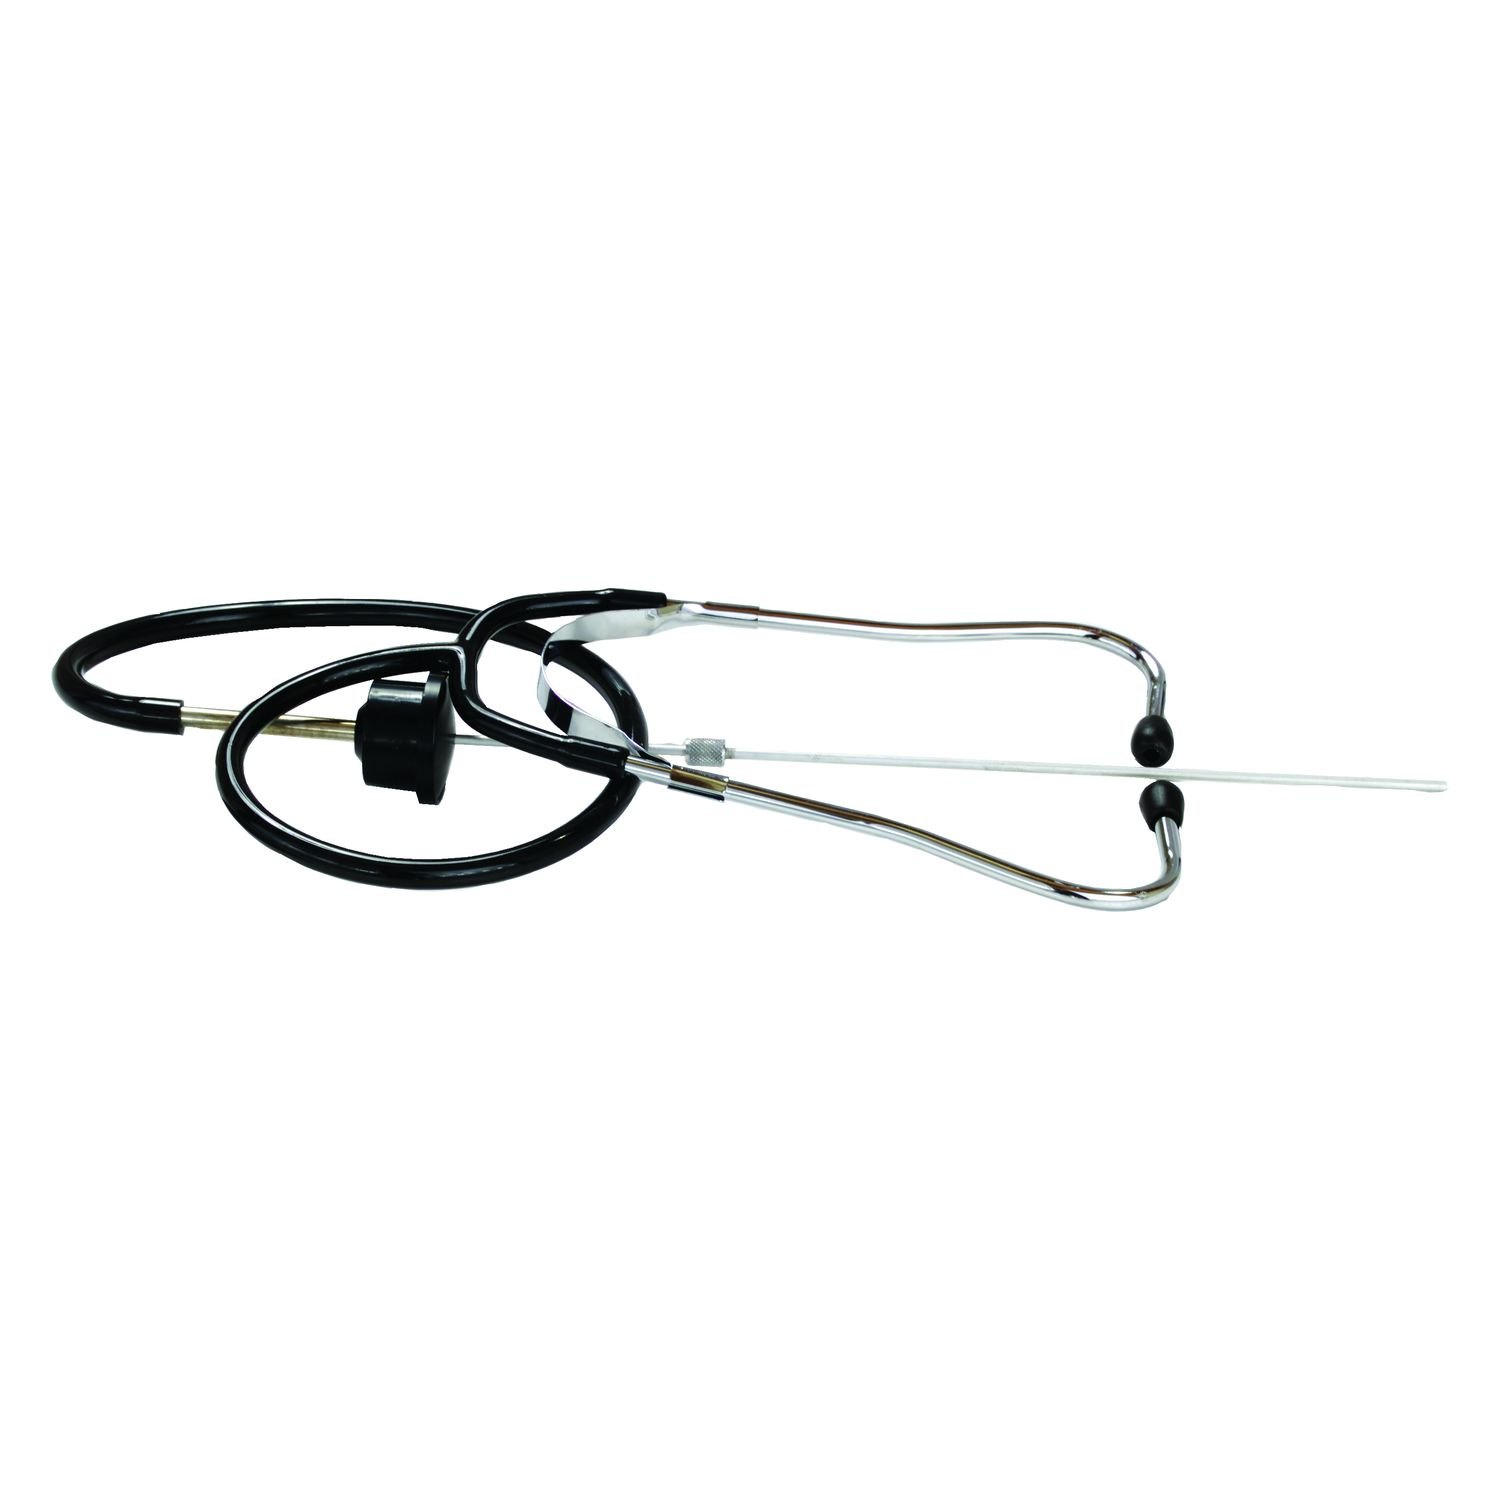 Details about   WPS STETHOSCOPE PART# 0108183 72 MIN 